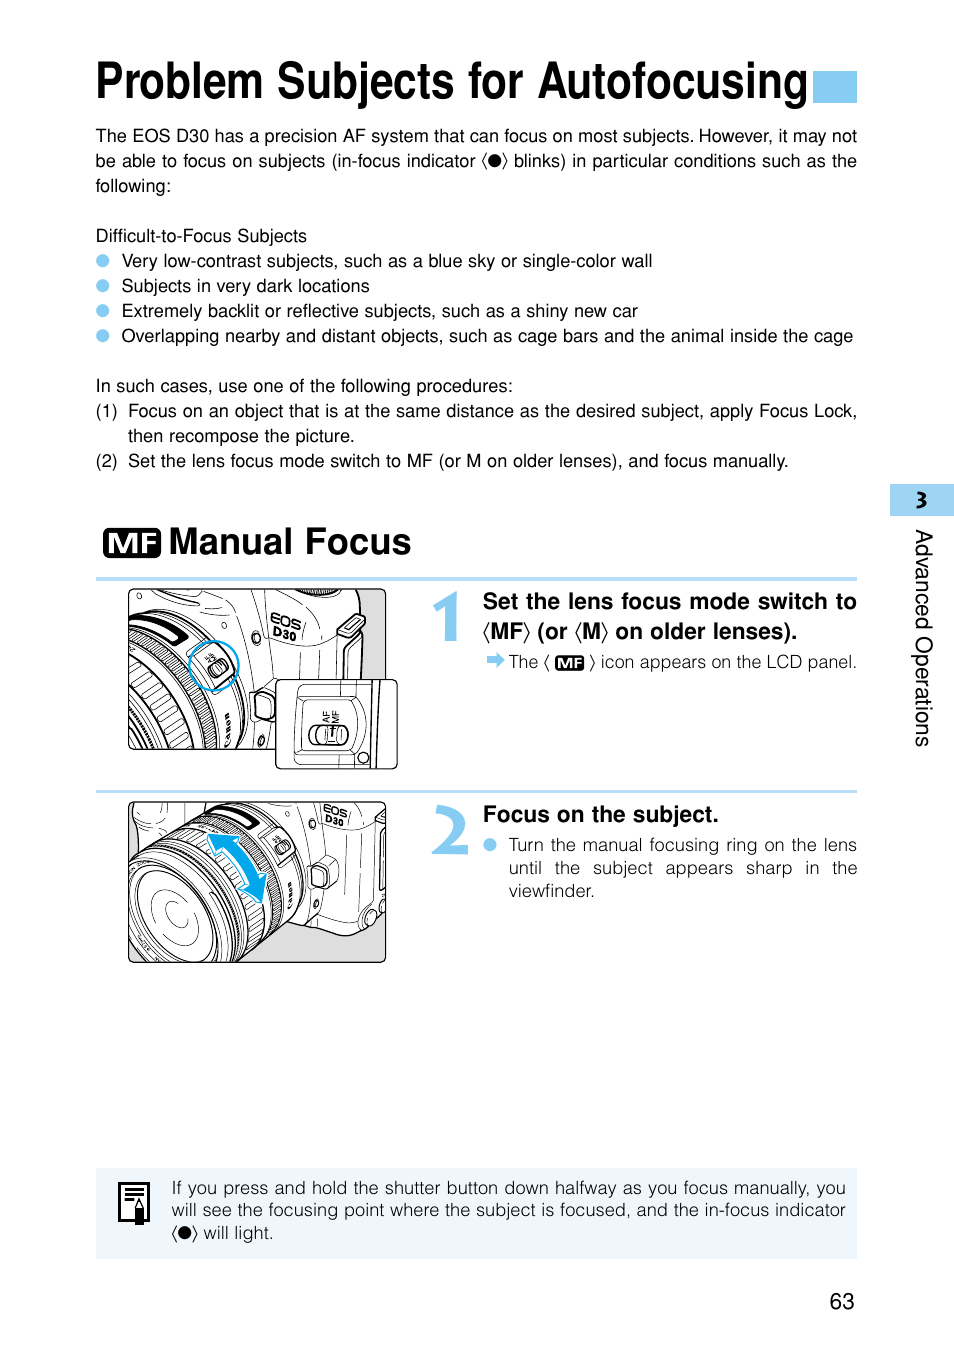 Problem subjects for autofocusing, Manual focus | Canon EOS D30 User Manual | Page 63 / 152